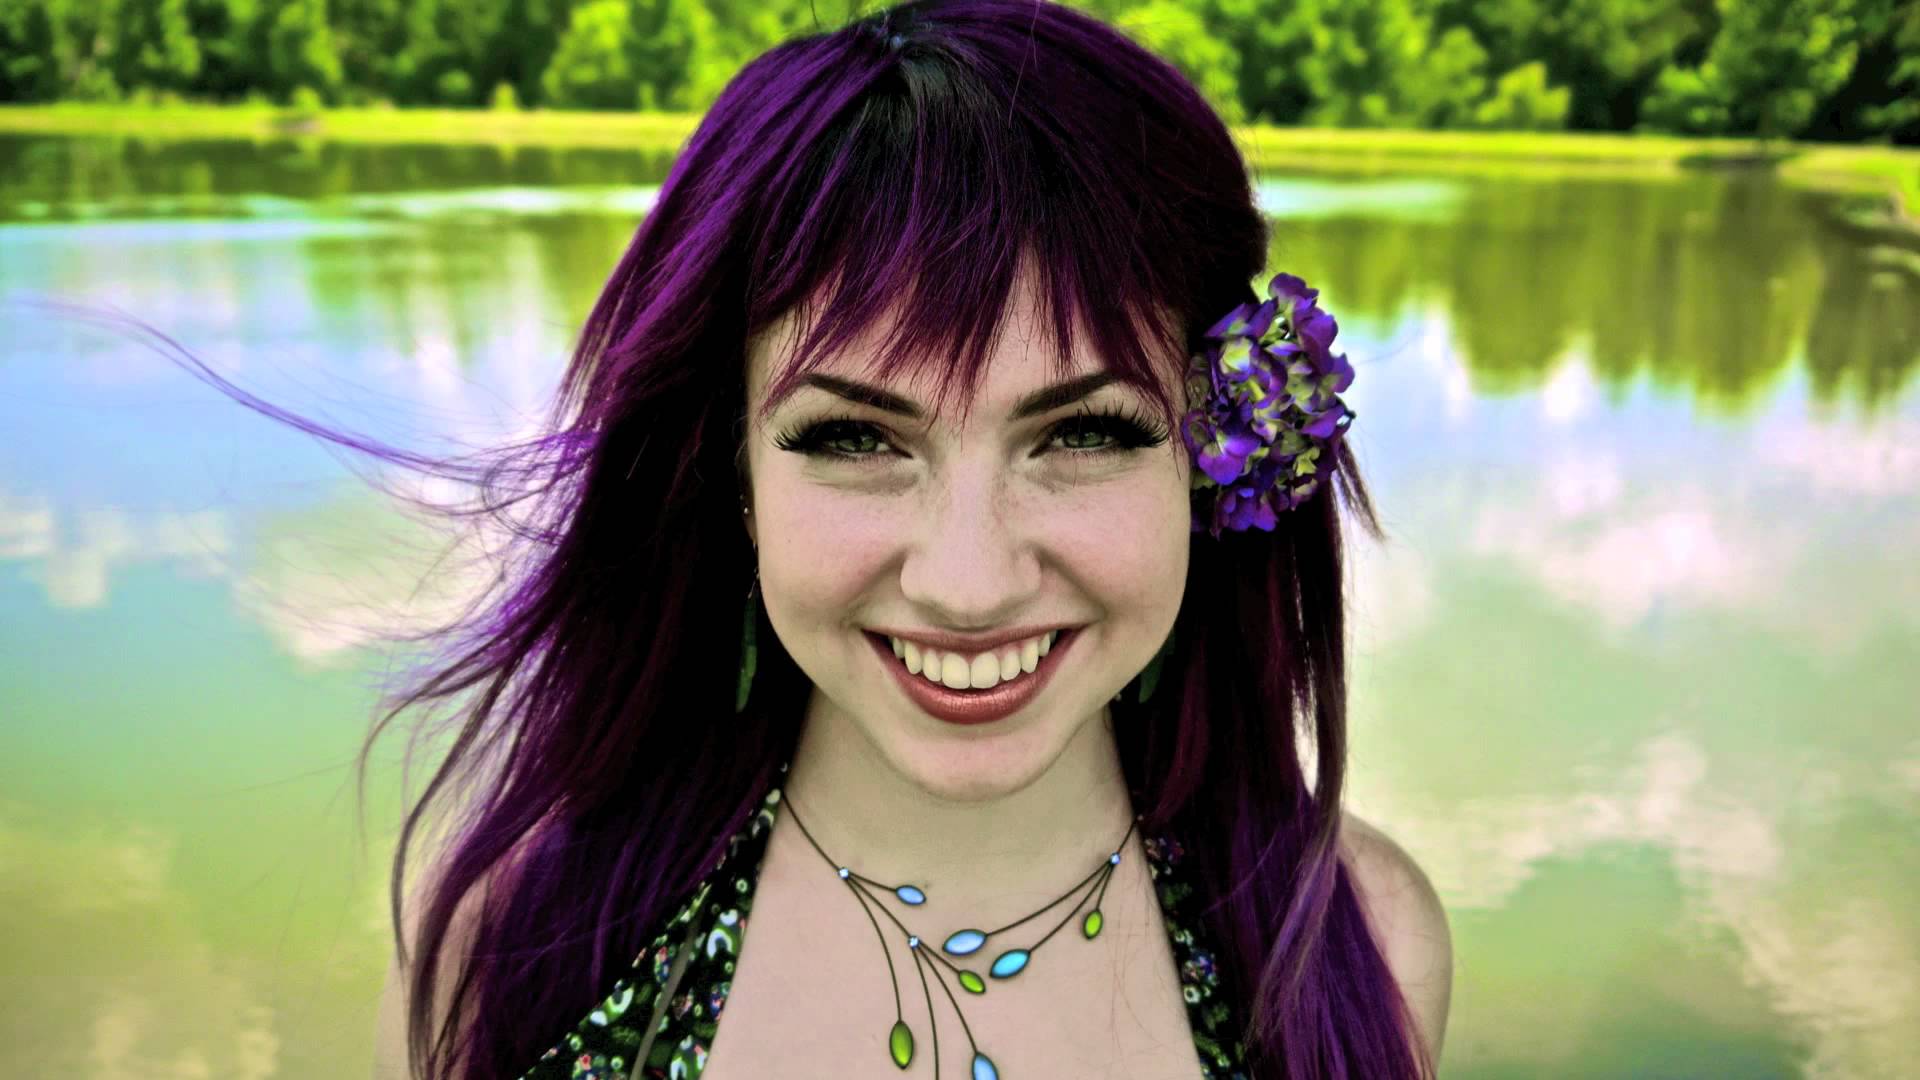 People 1920x1080 Veela lake necklace smiling purple hair women women outdoors water face forest